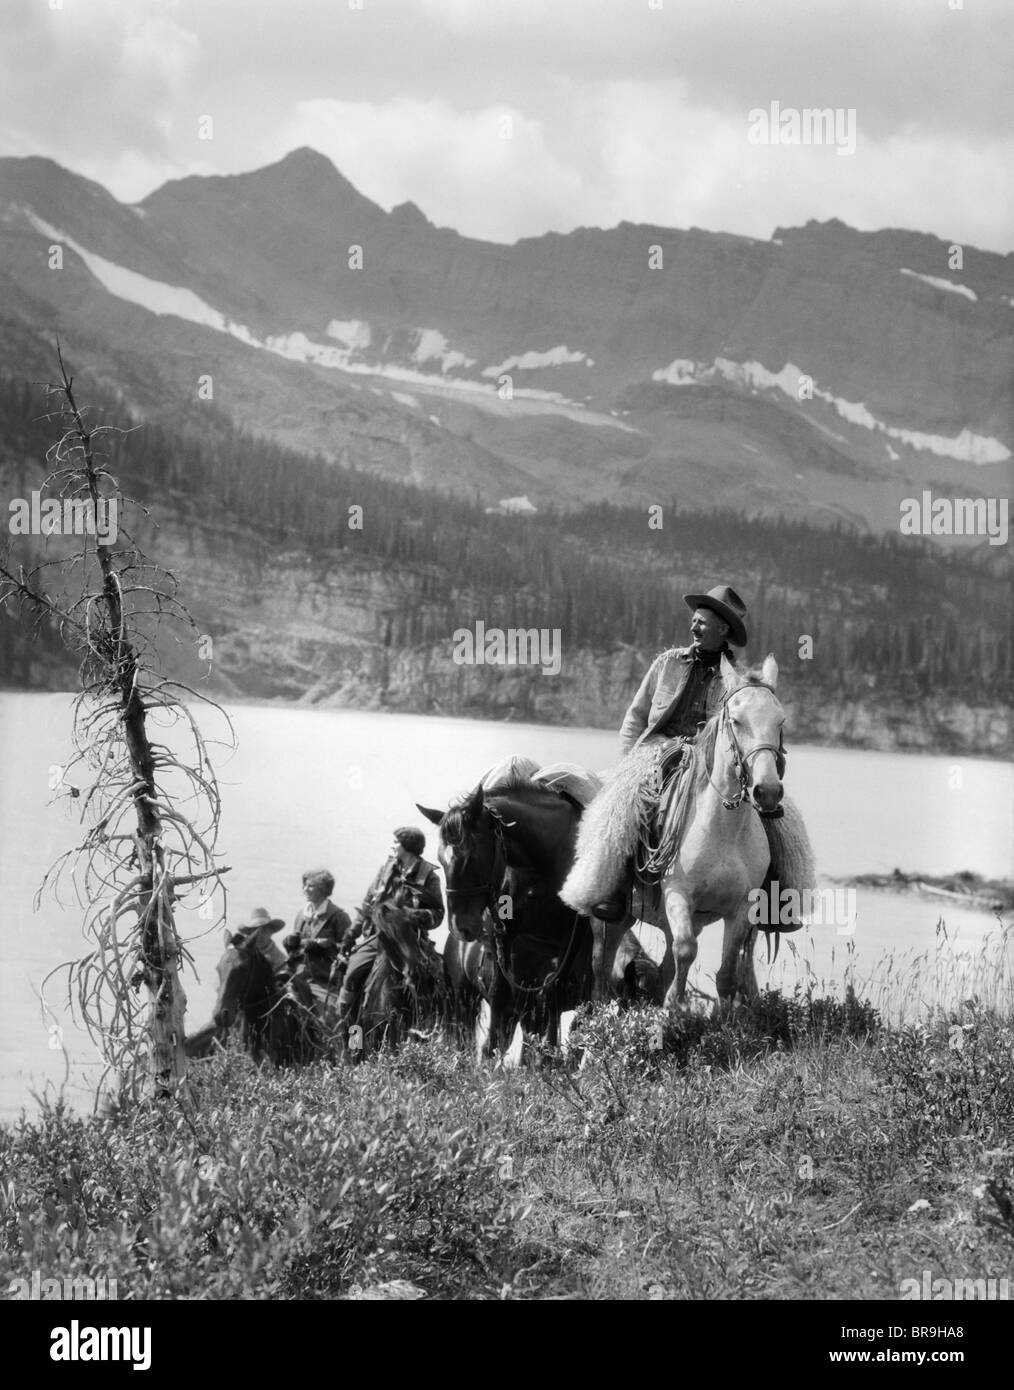 1920s 1930s TWO WOMEN ONE MAN RIDING HORSES WESTERN SADDLES COWBOY WEARING WOOL CHAPS BY MOUNTAIN LAKE IN CANADA Stock Photo